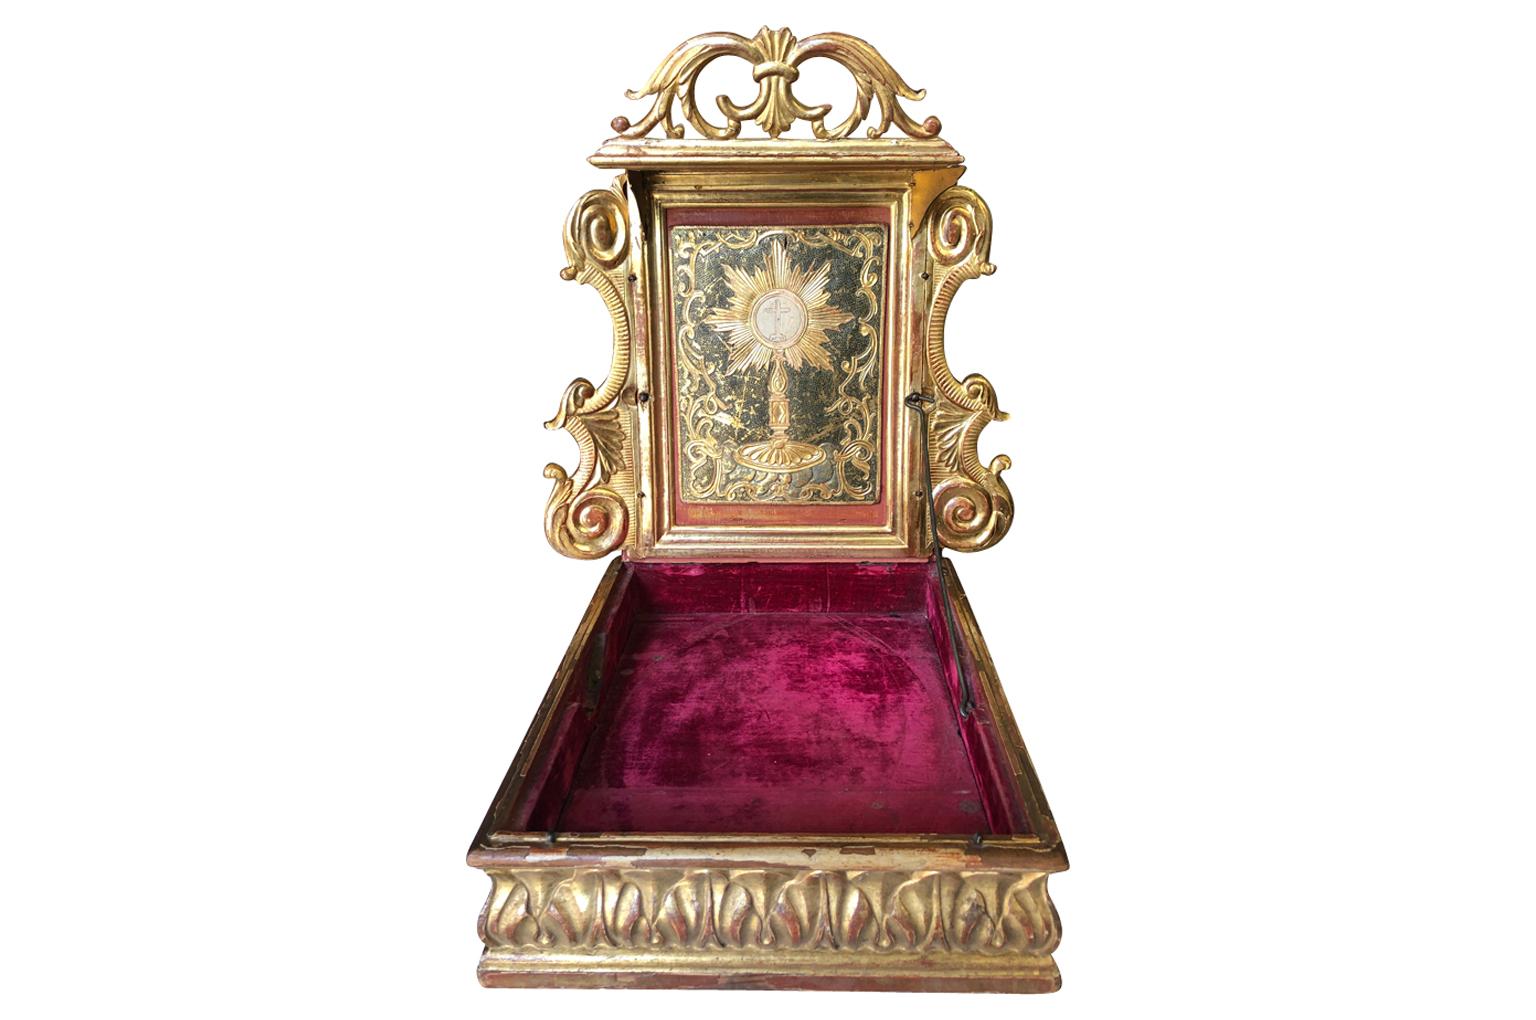 A stunning 18th century Oratorio - Traveling prayer table - in stunning giltwood from the Barcelona area. Beautifully crafted with wonderful carving detail. The oratorio is constructed to fold together so that it is portable.